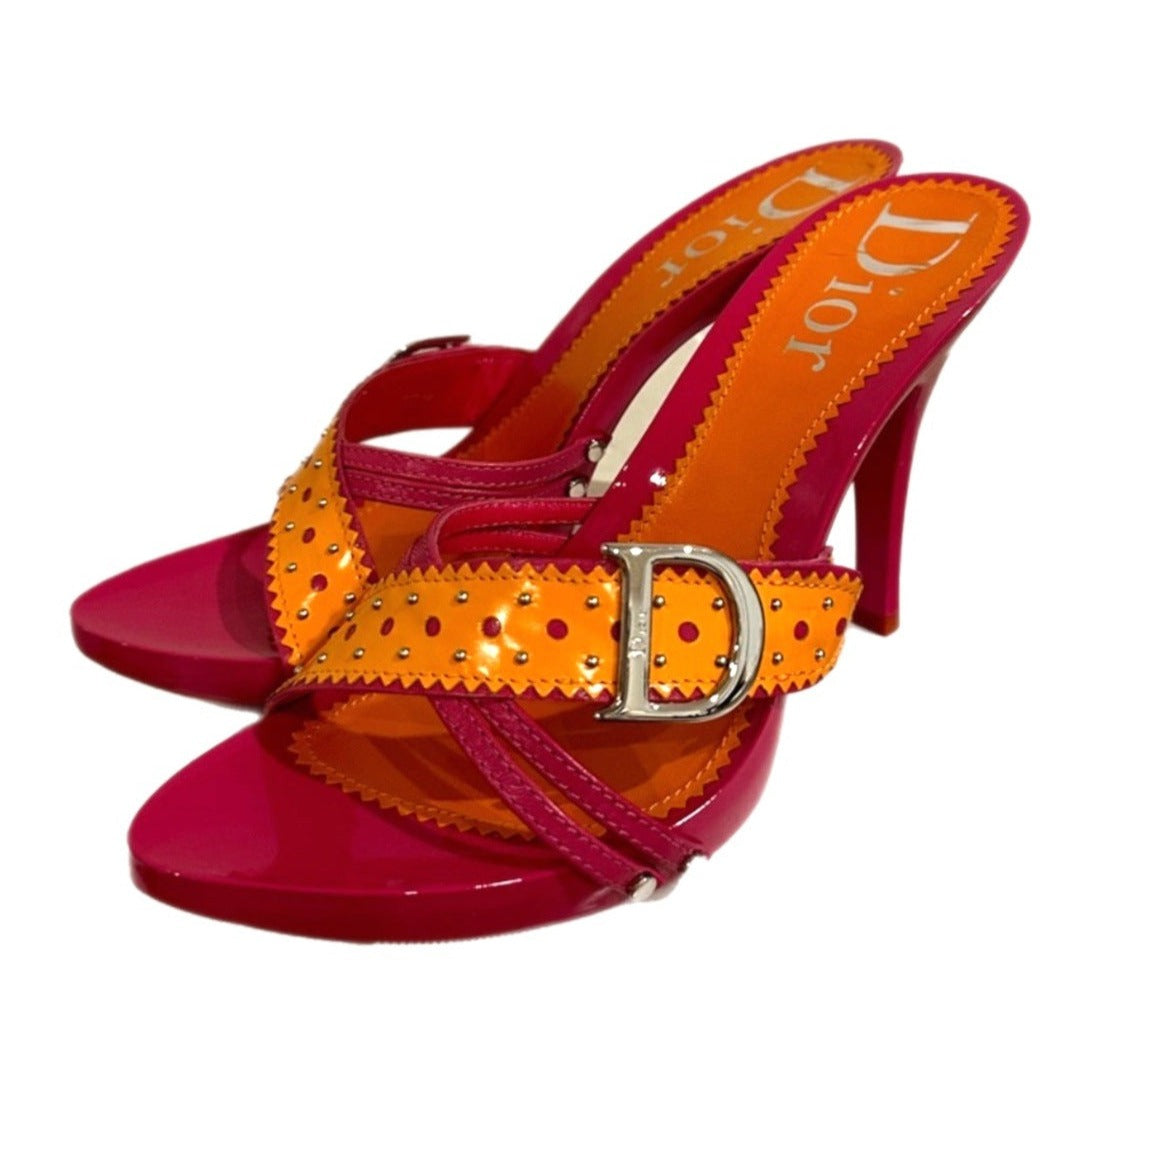 Step into retro elegance with Vintage Dior Pink & Orange Sandals. Embrace chic charm with these colorful, timeless heels.